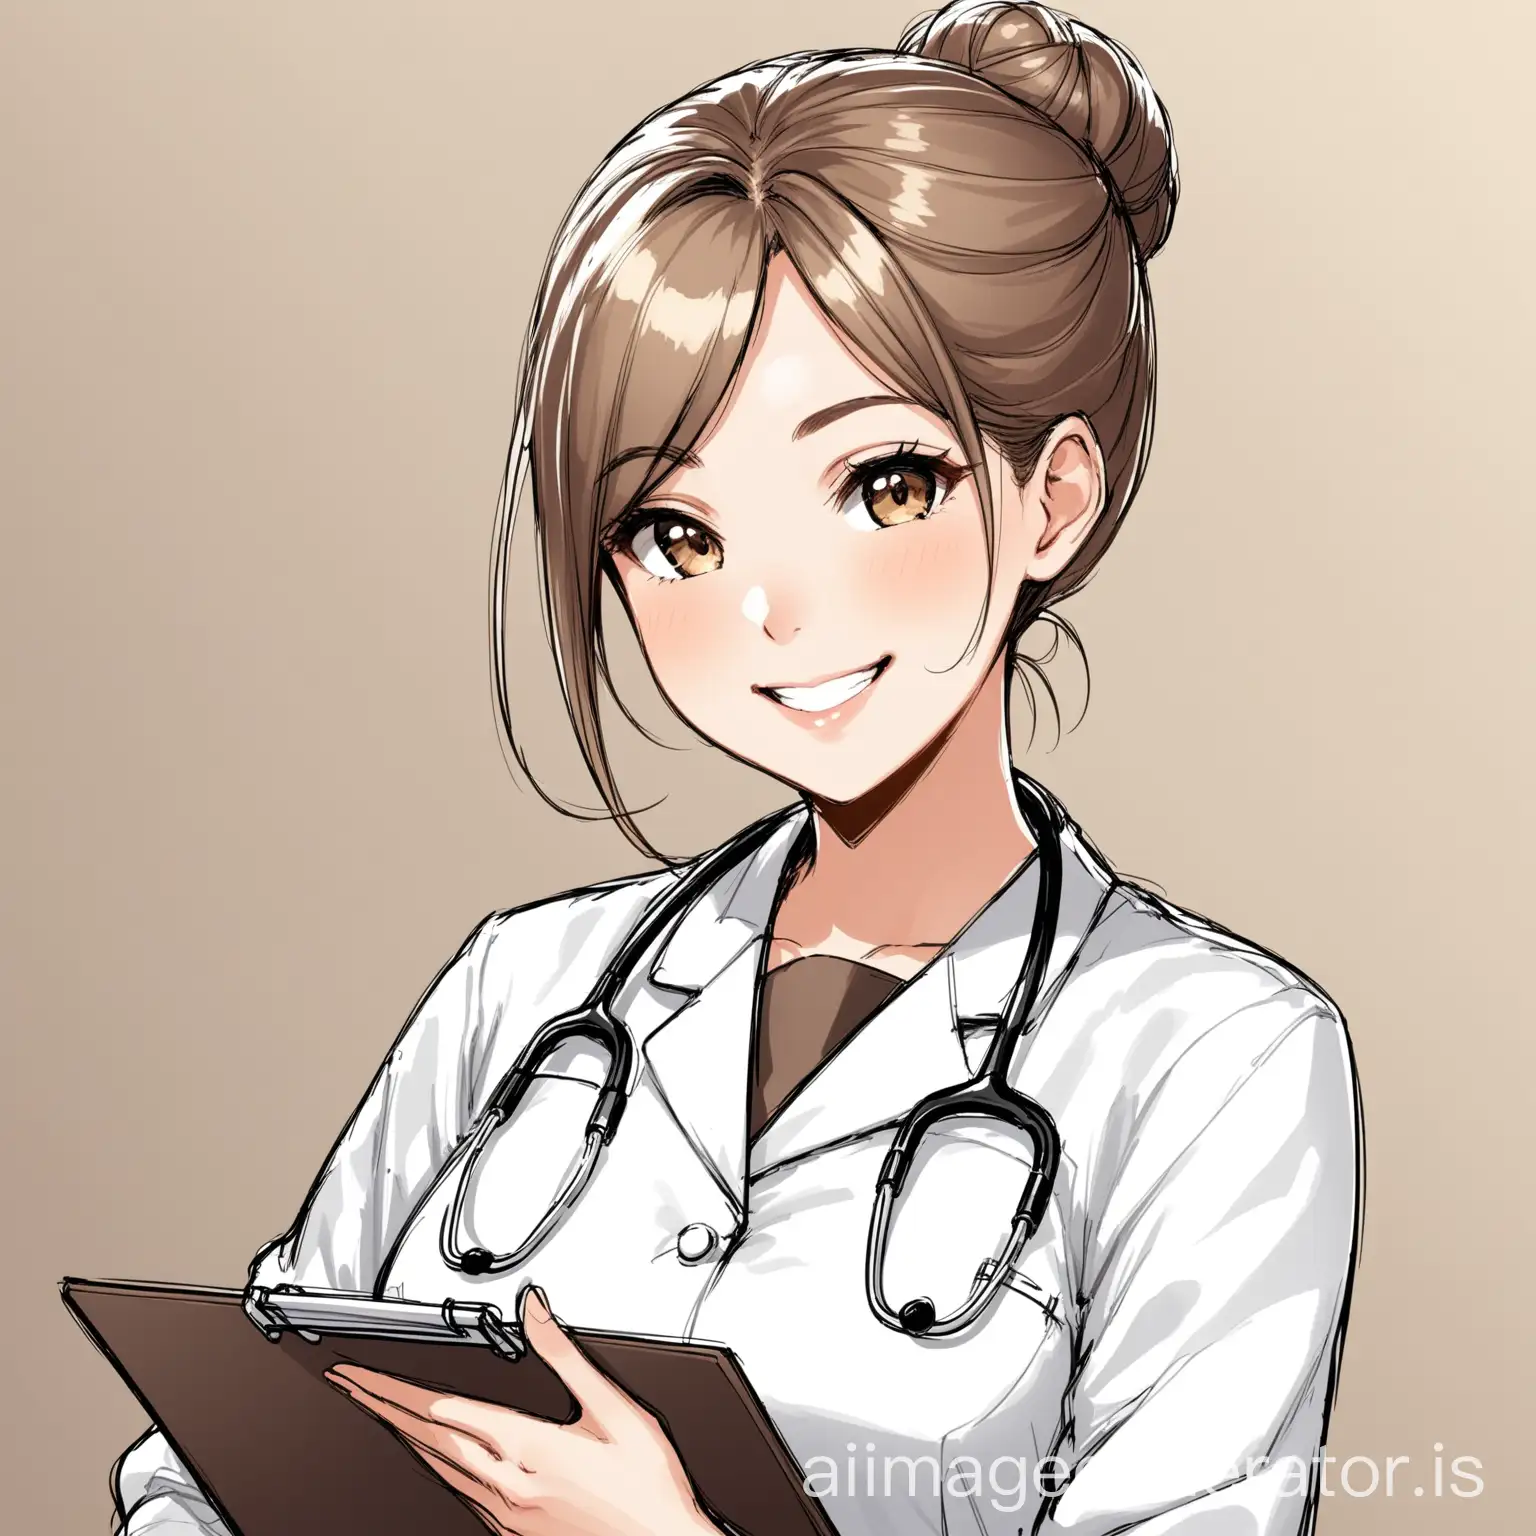 as a colourless sketch put this girl at a 45 degree angle with large breasts in a doctors uniform holding a clipboard it with her hair in a bun smiling. make it full frame 